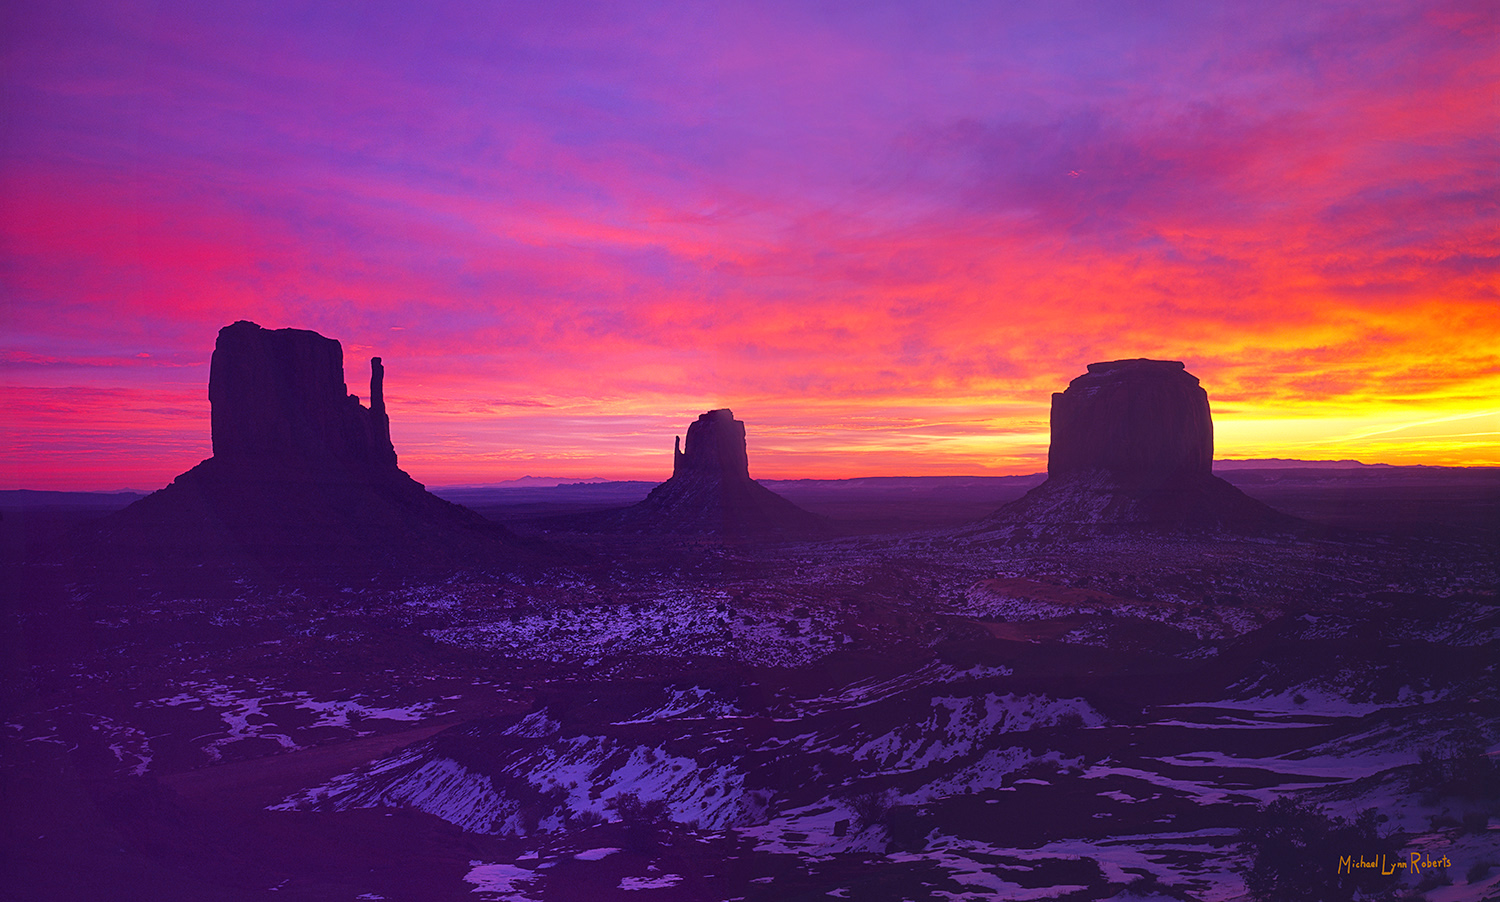 Who doesn't love a colorful sunrise or sunset? This sunrise composition is the classic view of Monument Valley in the heart of...